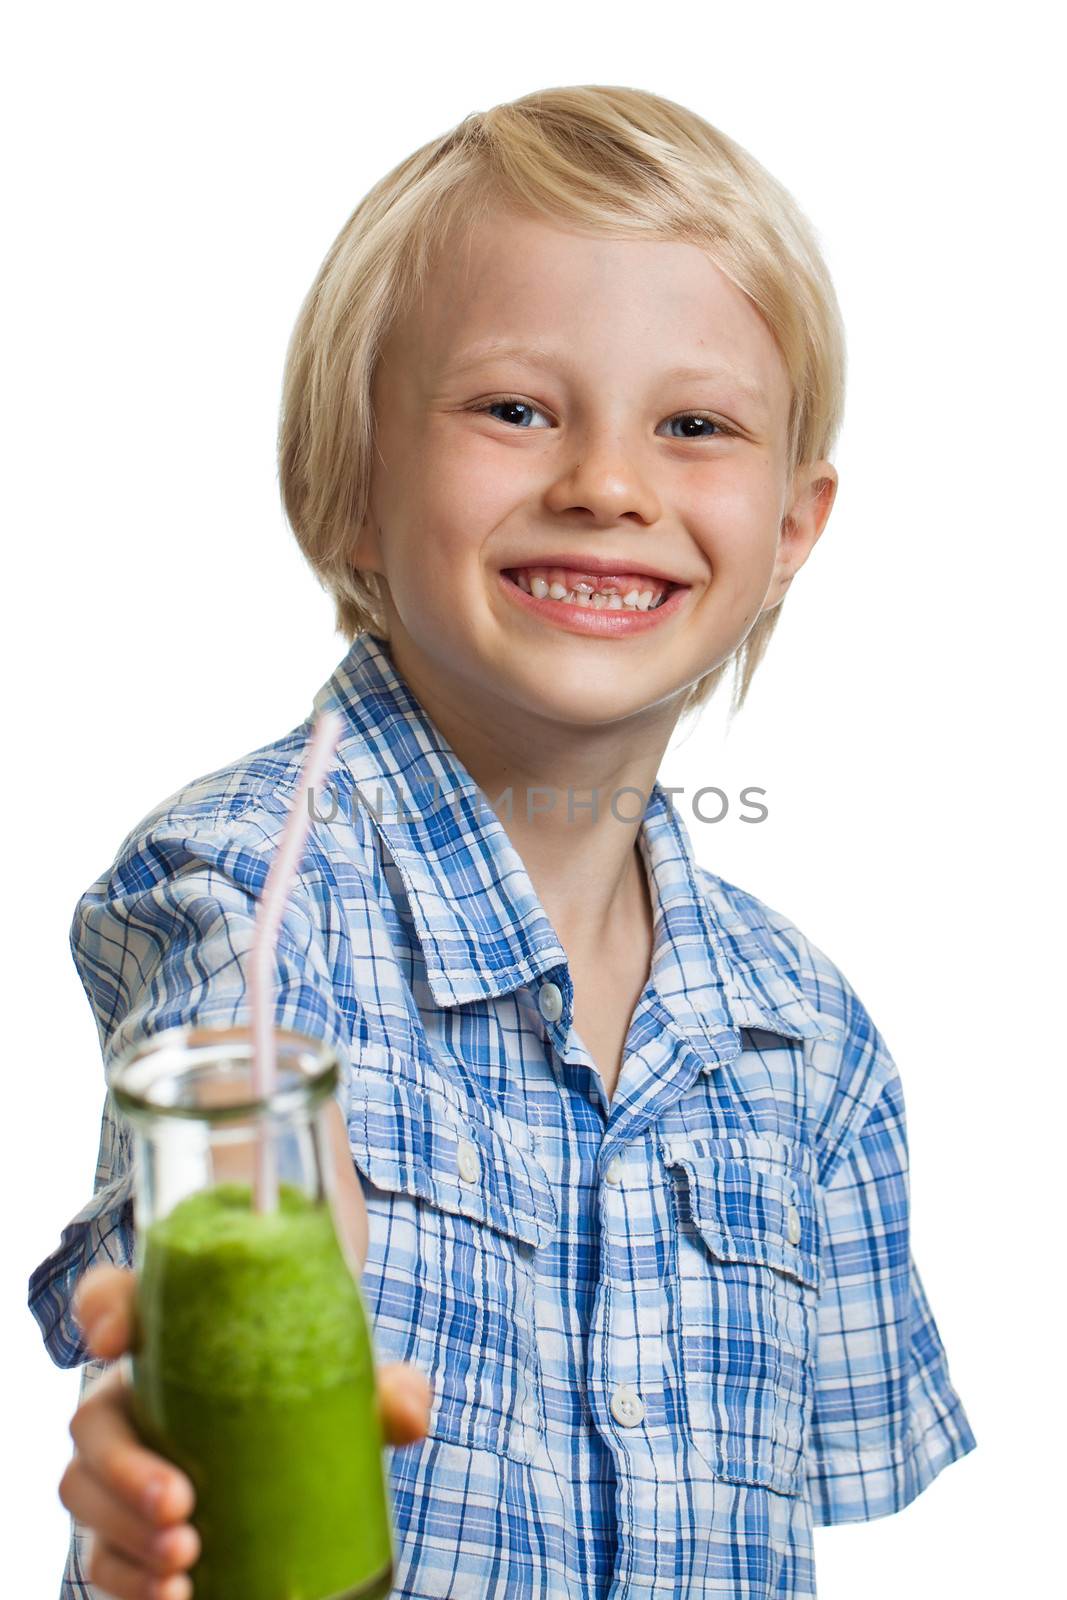 Cute boy with green smoothie or juice by Jaykayl